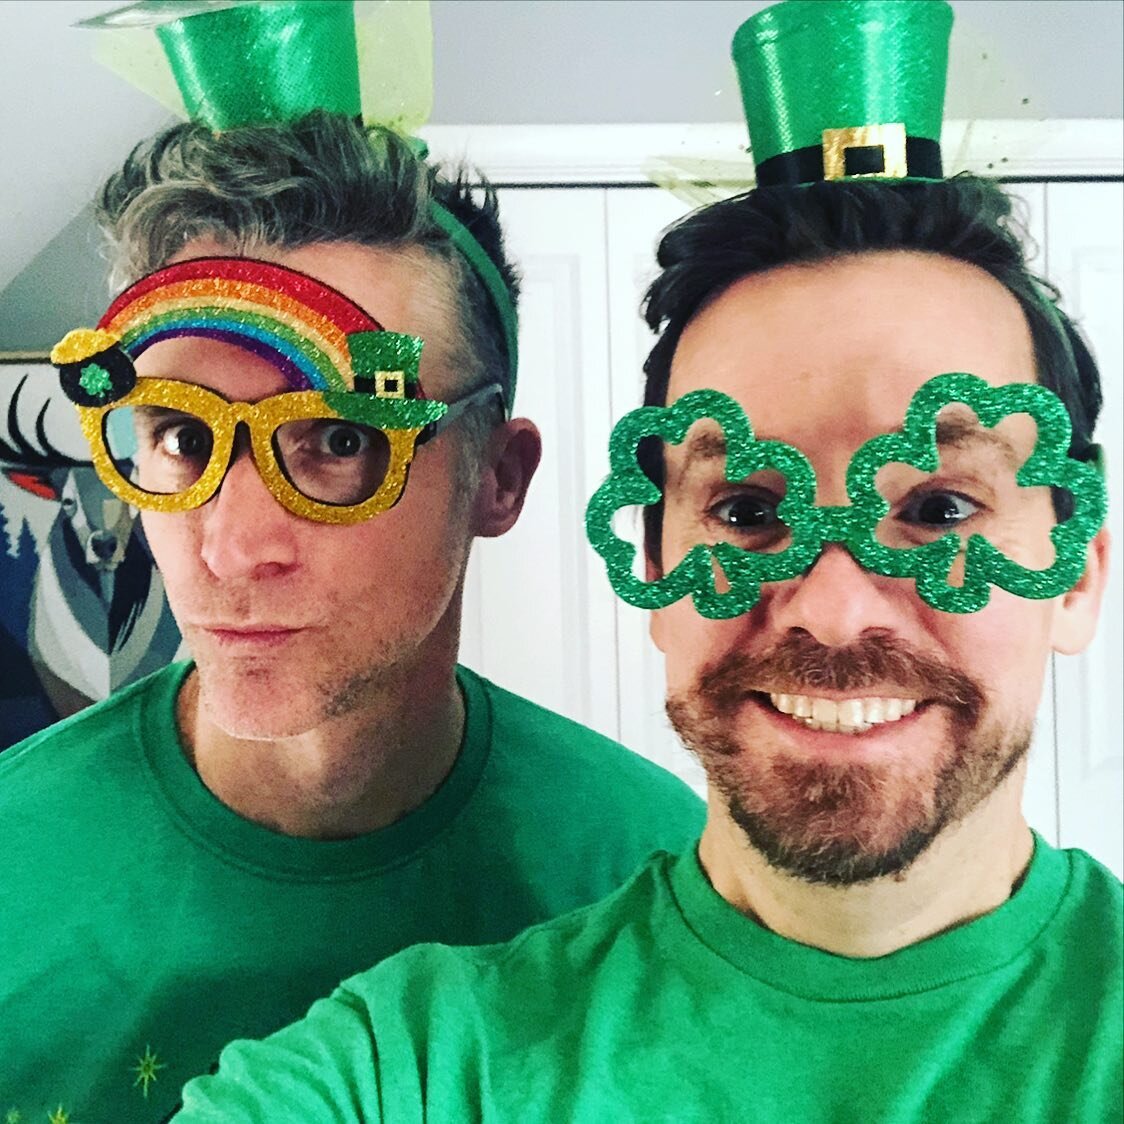 #happystpatricksday may you have the luck of the Irish today! Don&rsquo;t ever stop searching for your pot of gold :) @bill_stockbridge #irish #celebrate #luck #luckoftheirish #potofgold